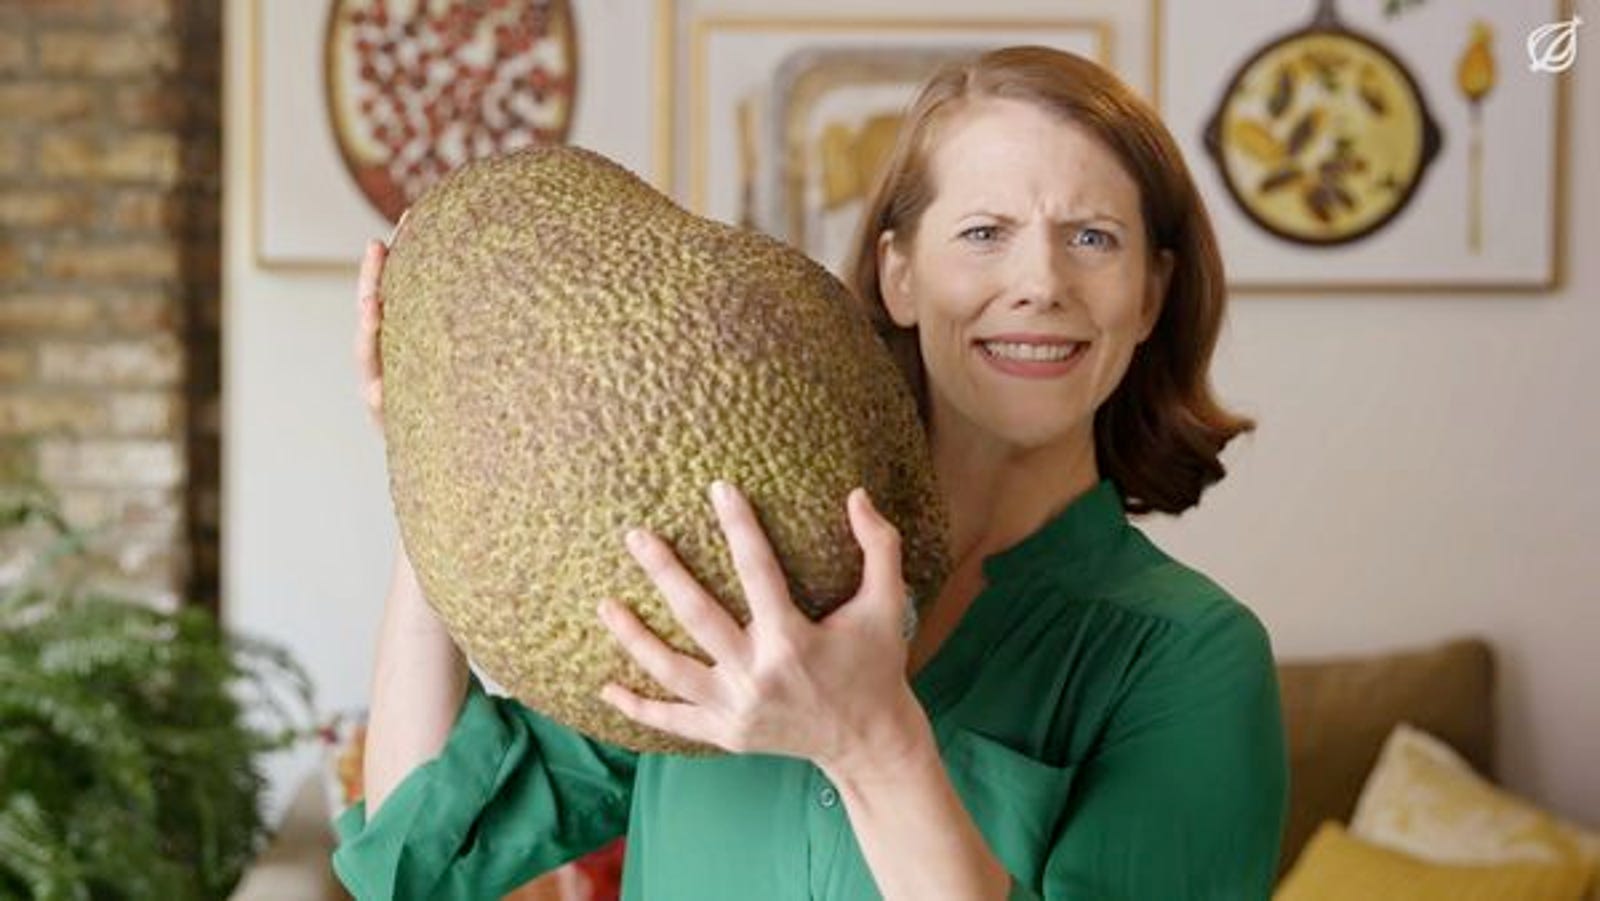 A Fun Recipe With Jackfruit You Should Learn To Avoid Looking Like A Knuckl...